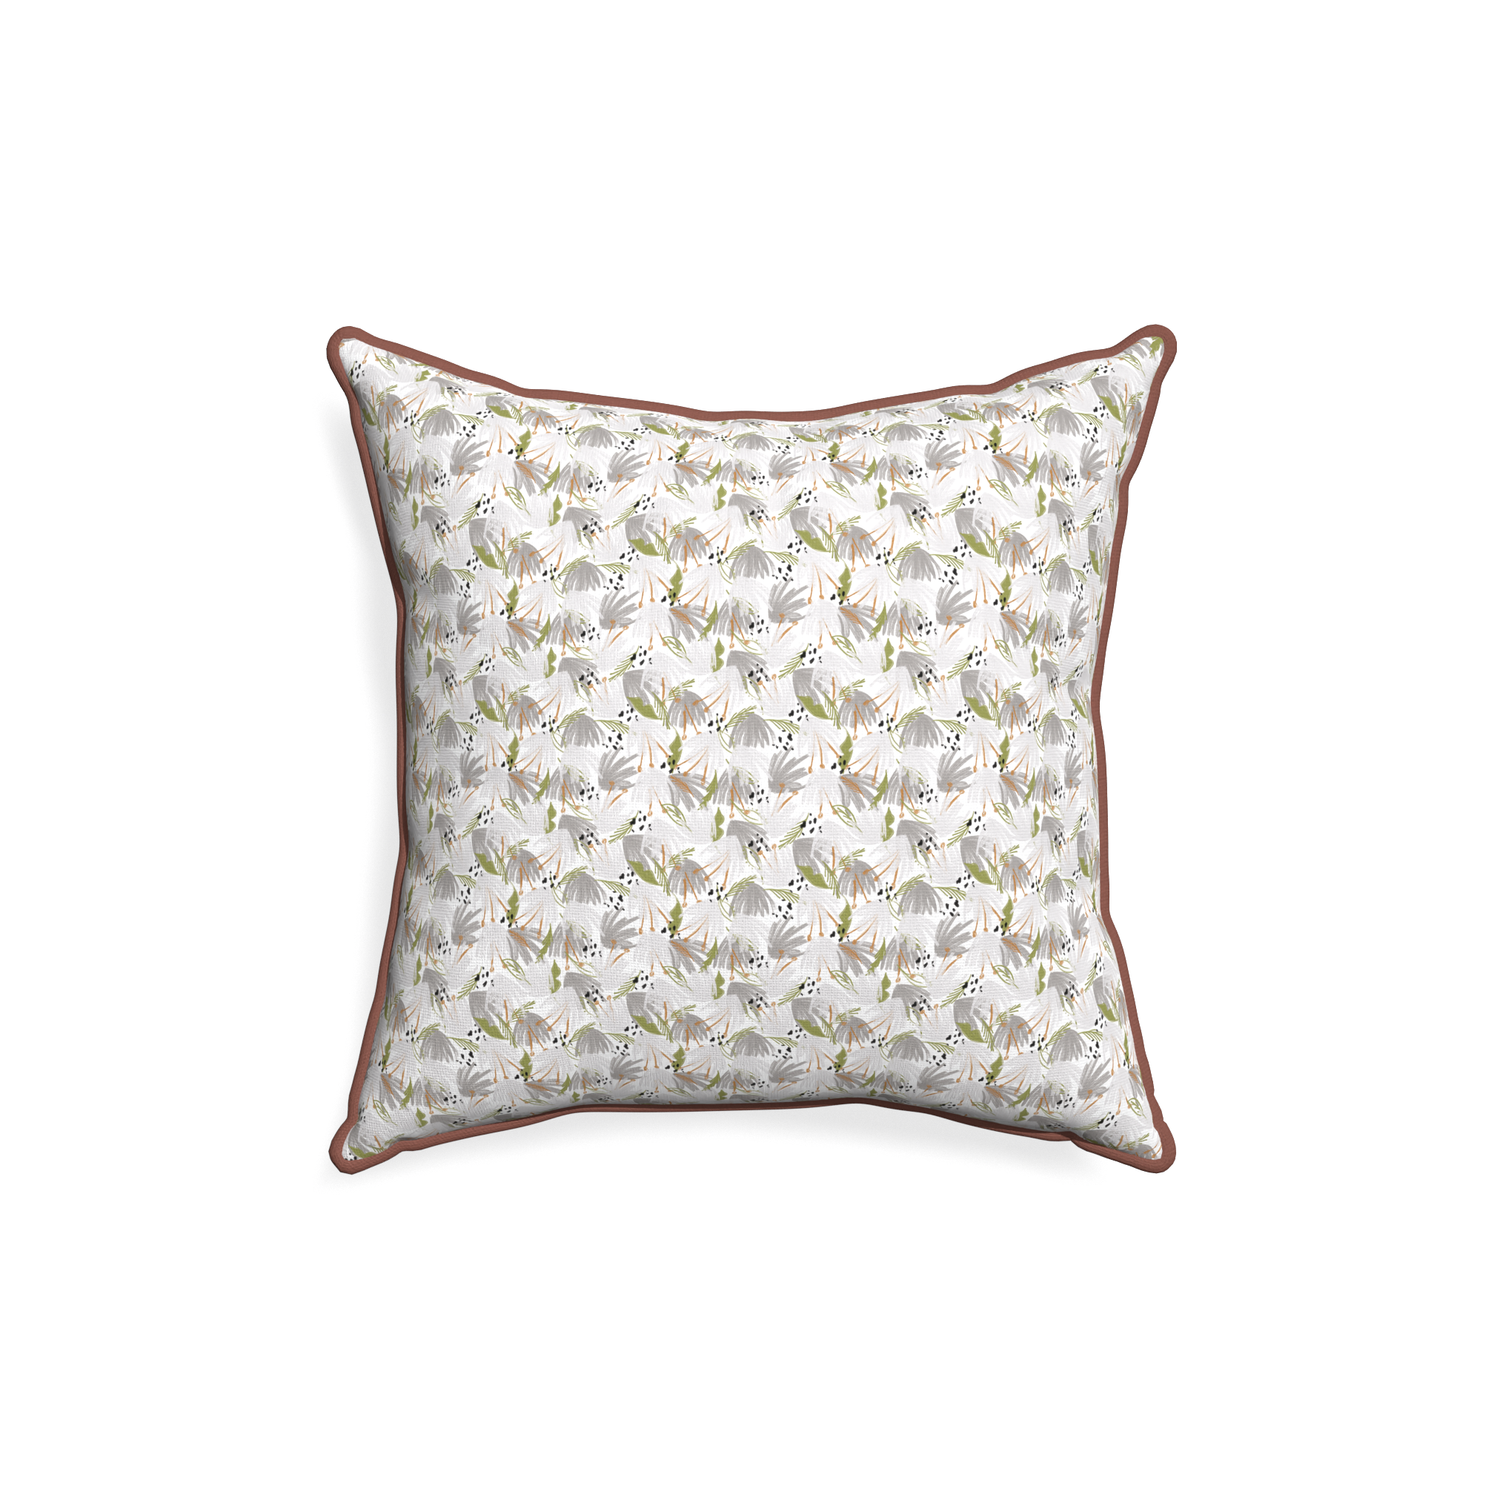 18-square eden grey custom pillow with w piping on white background